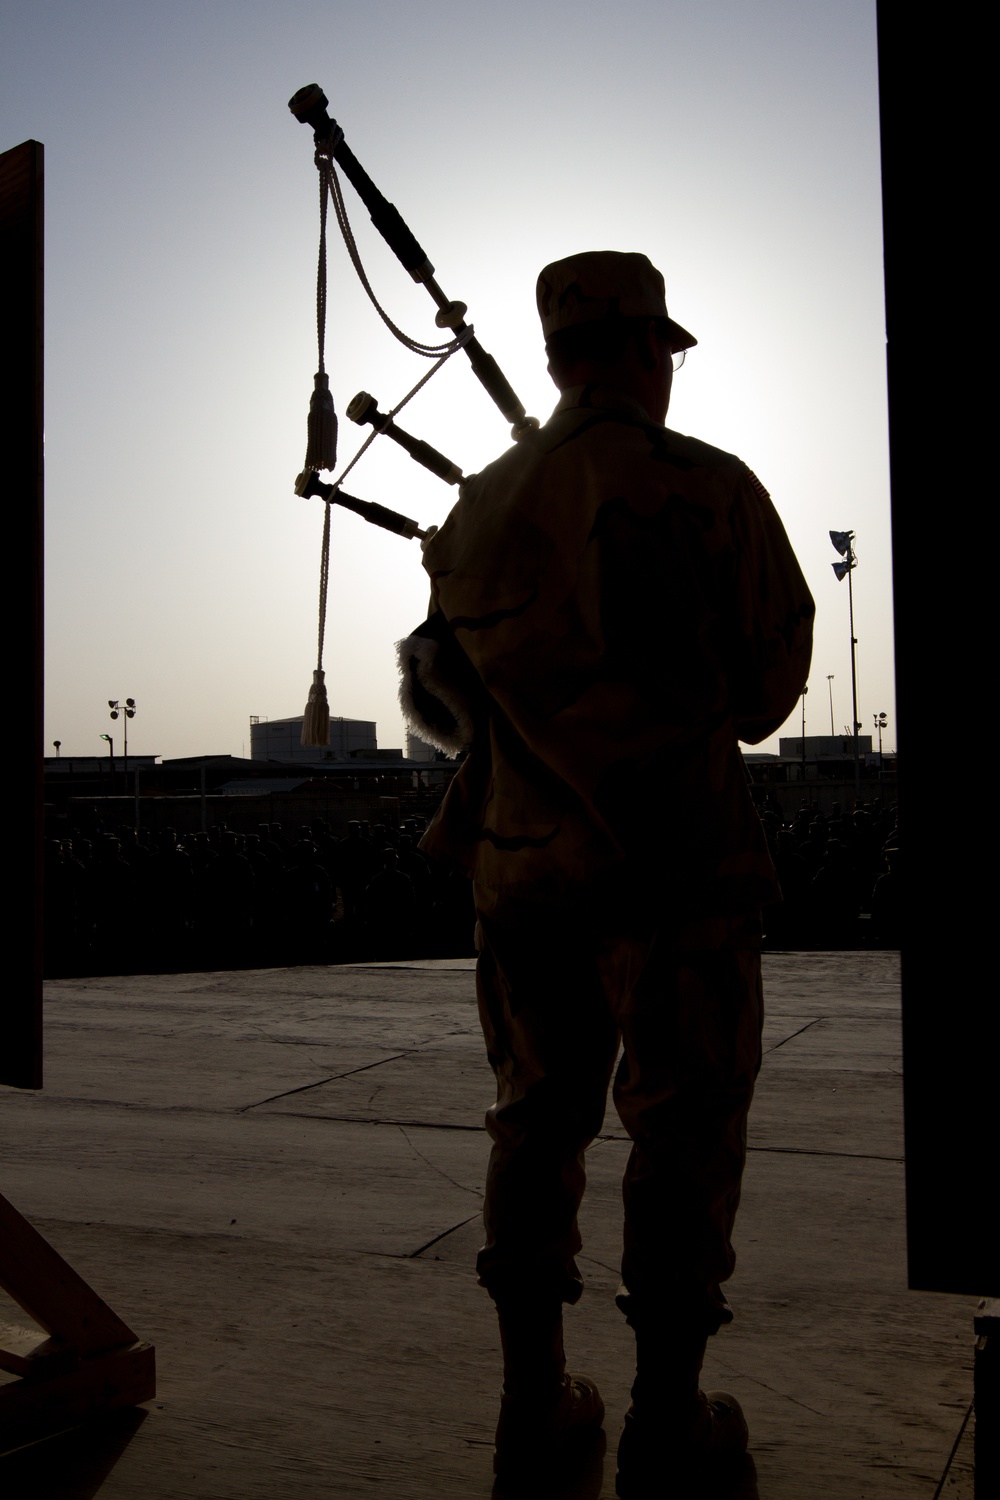 Service members remember 9/11 in Kandahar Airfield ceremony